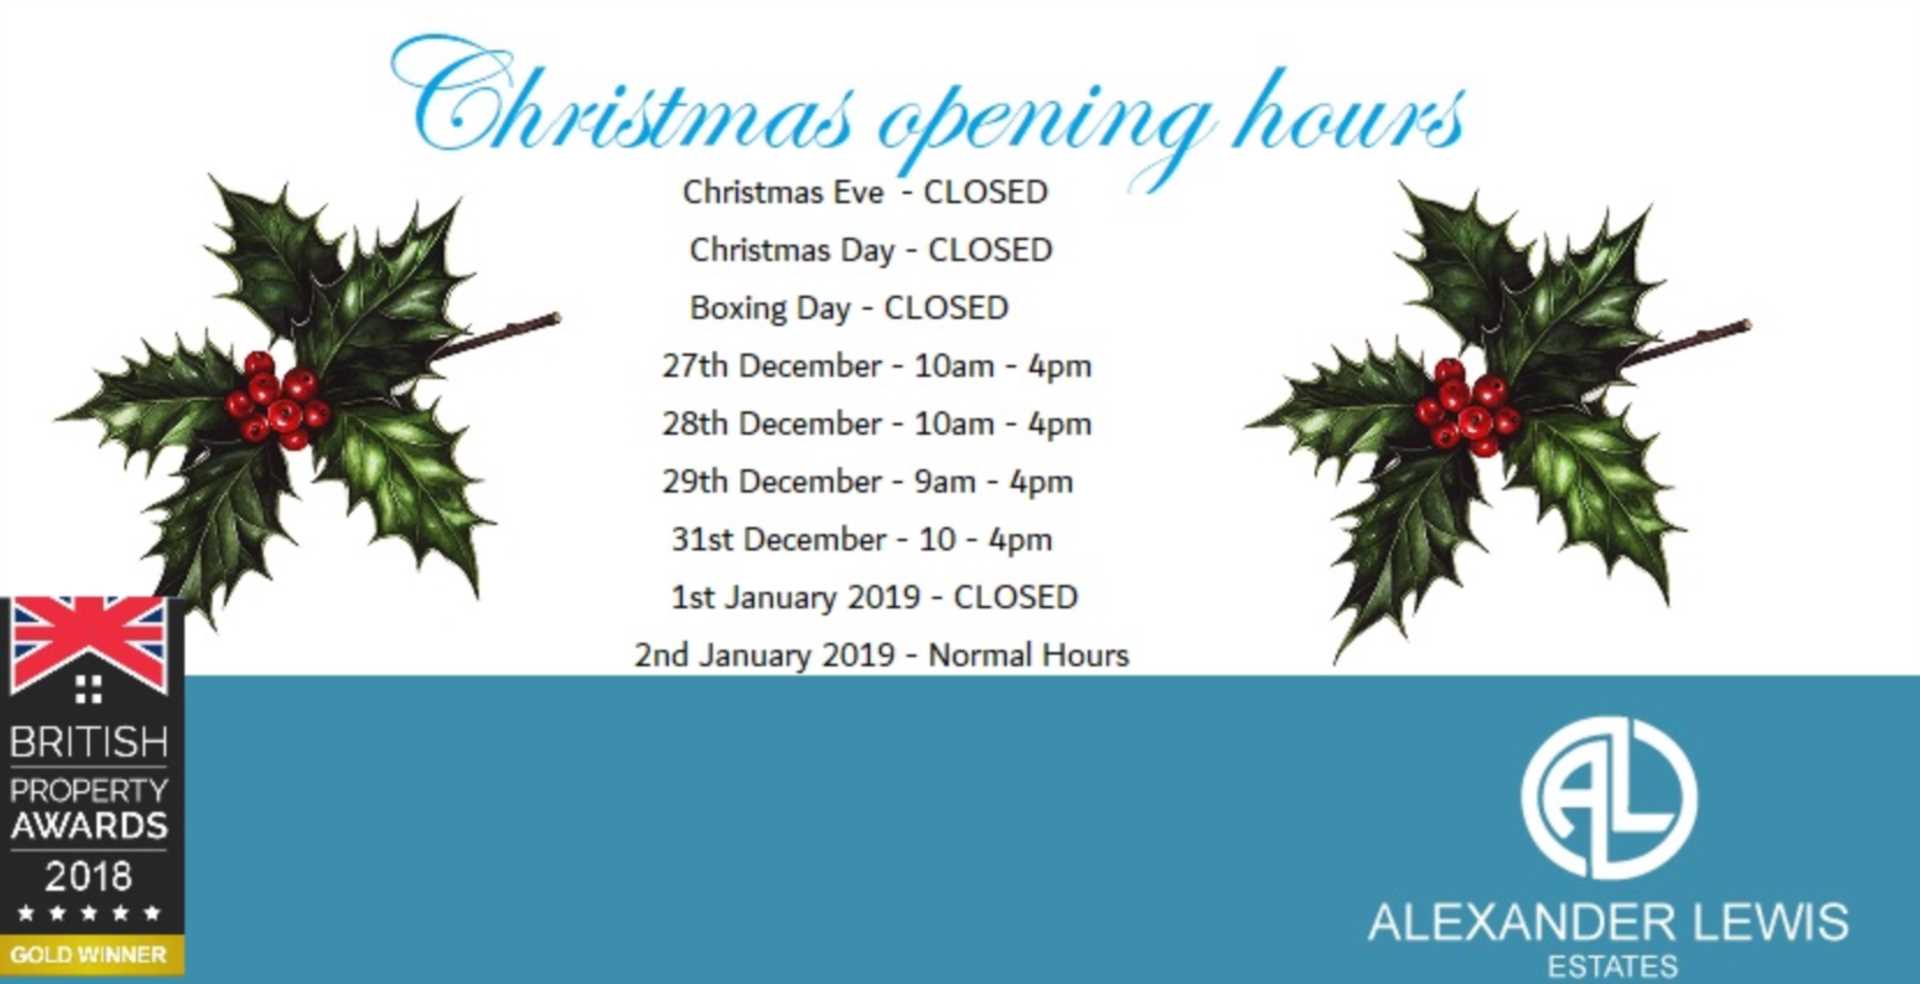 Christmas opening hours 2018